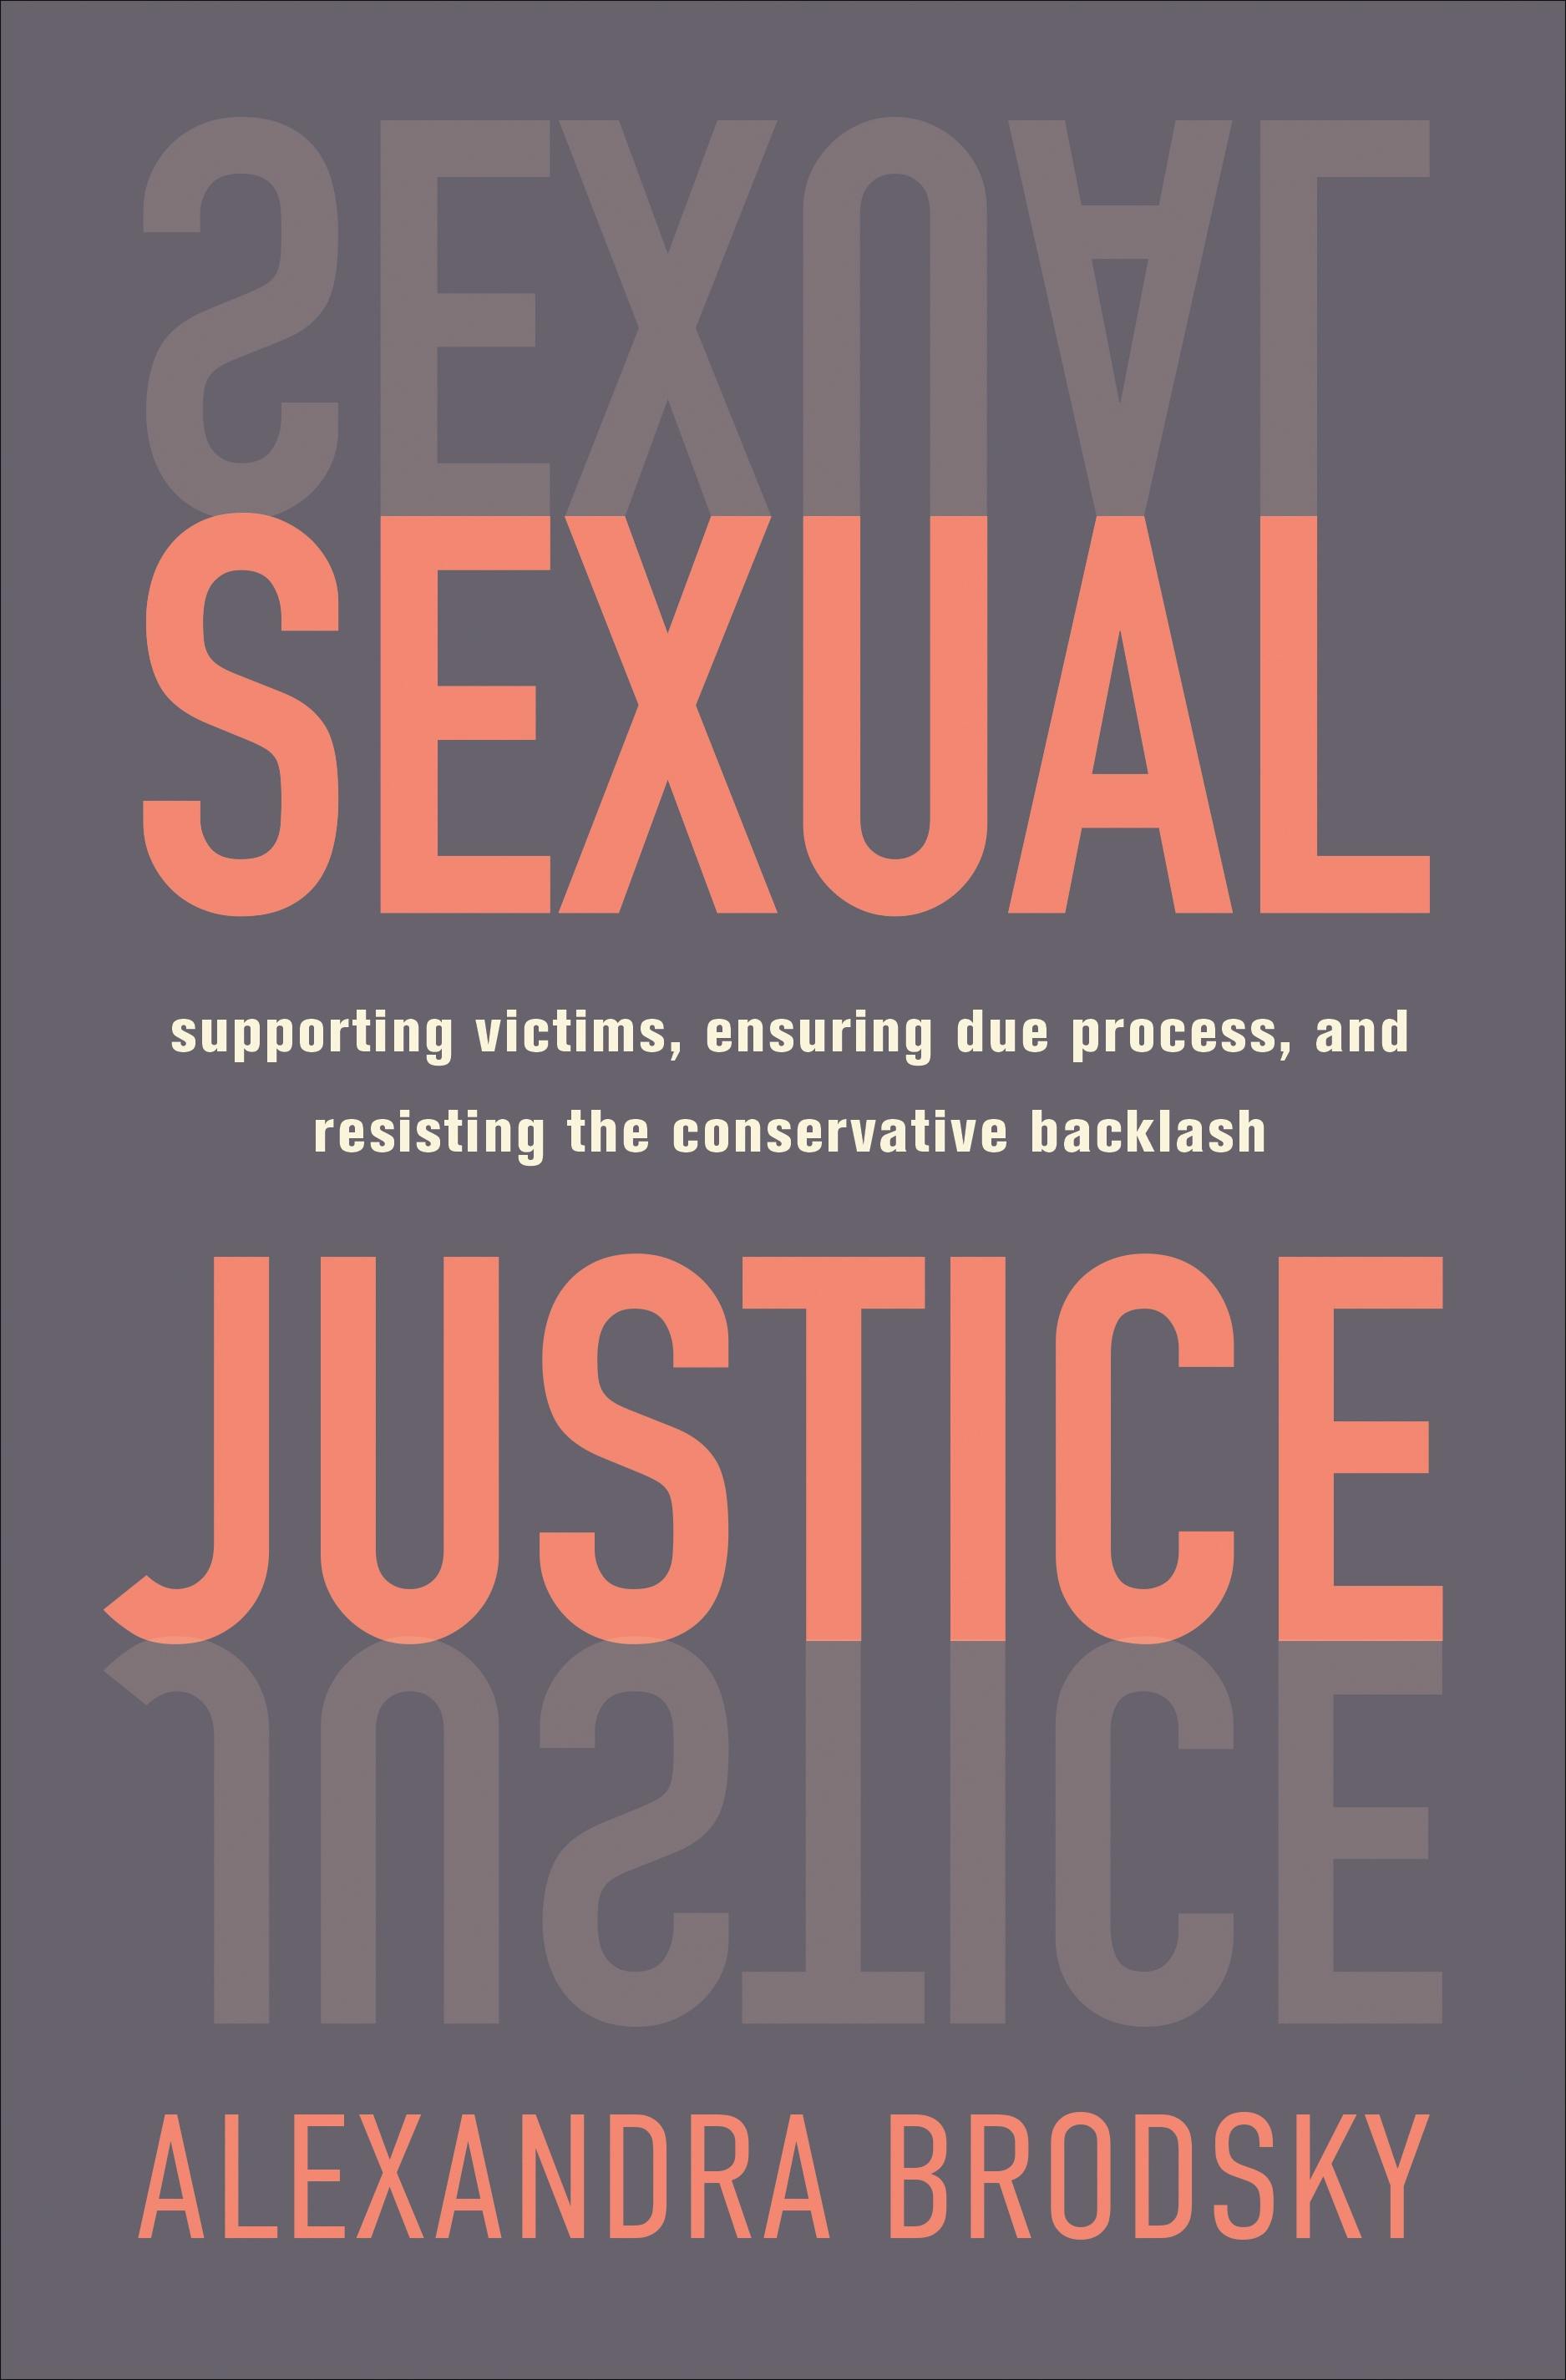 The Title IX Process is Like a Trial. Many Survivors Navigate it Alone., Opinion